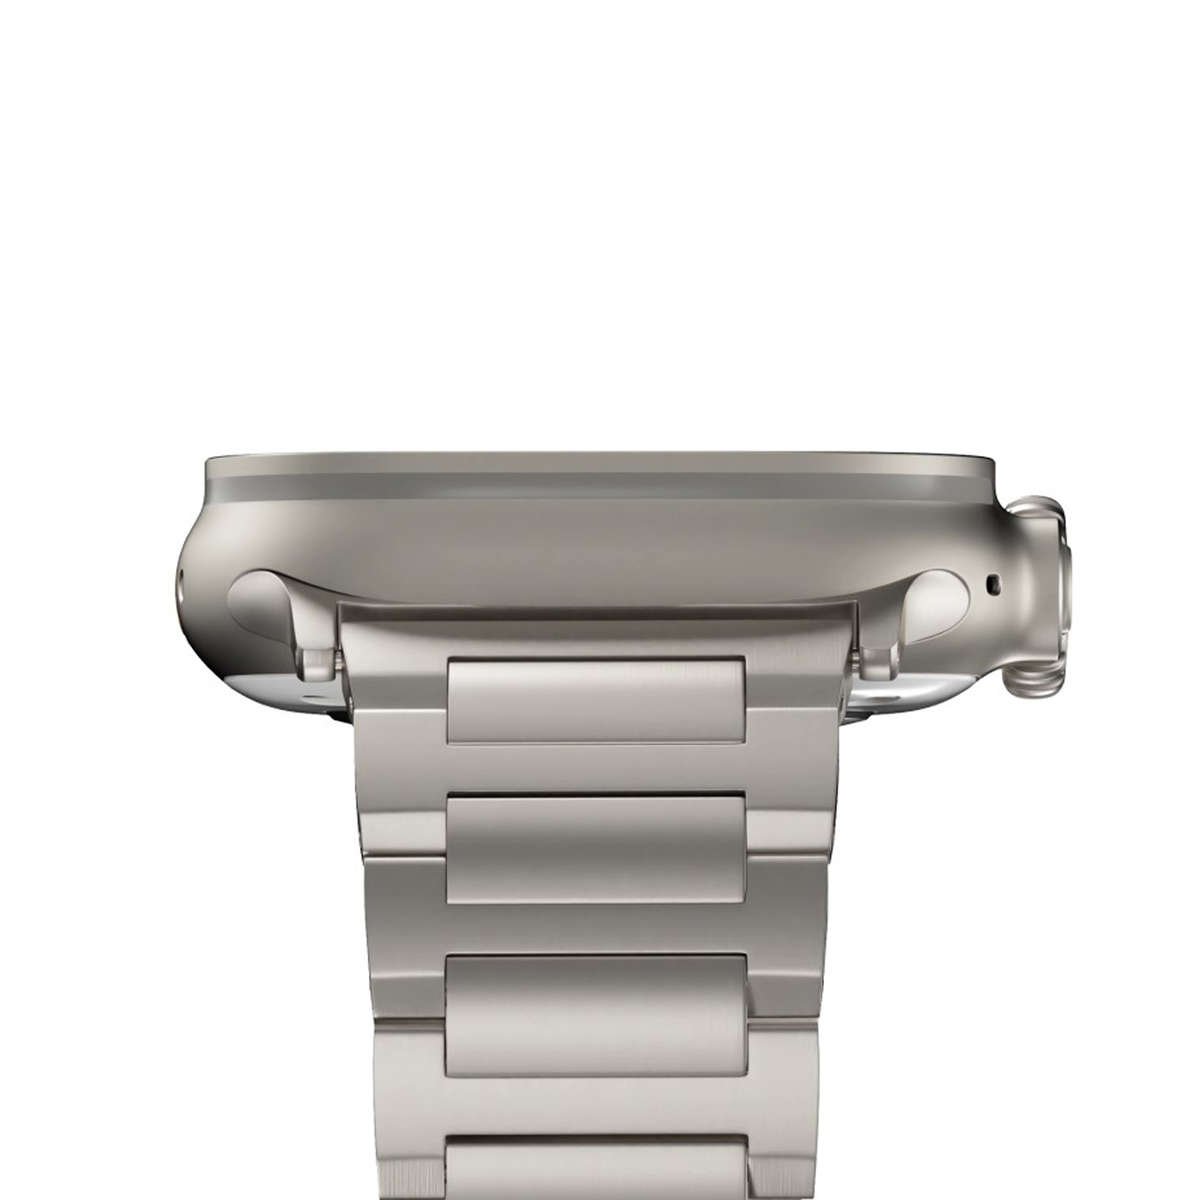 SANDMARC Stainless Steel Edition Apple Watch Band